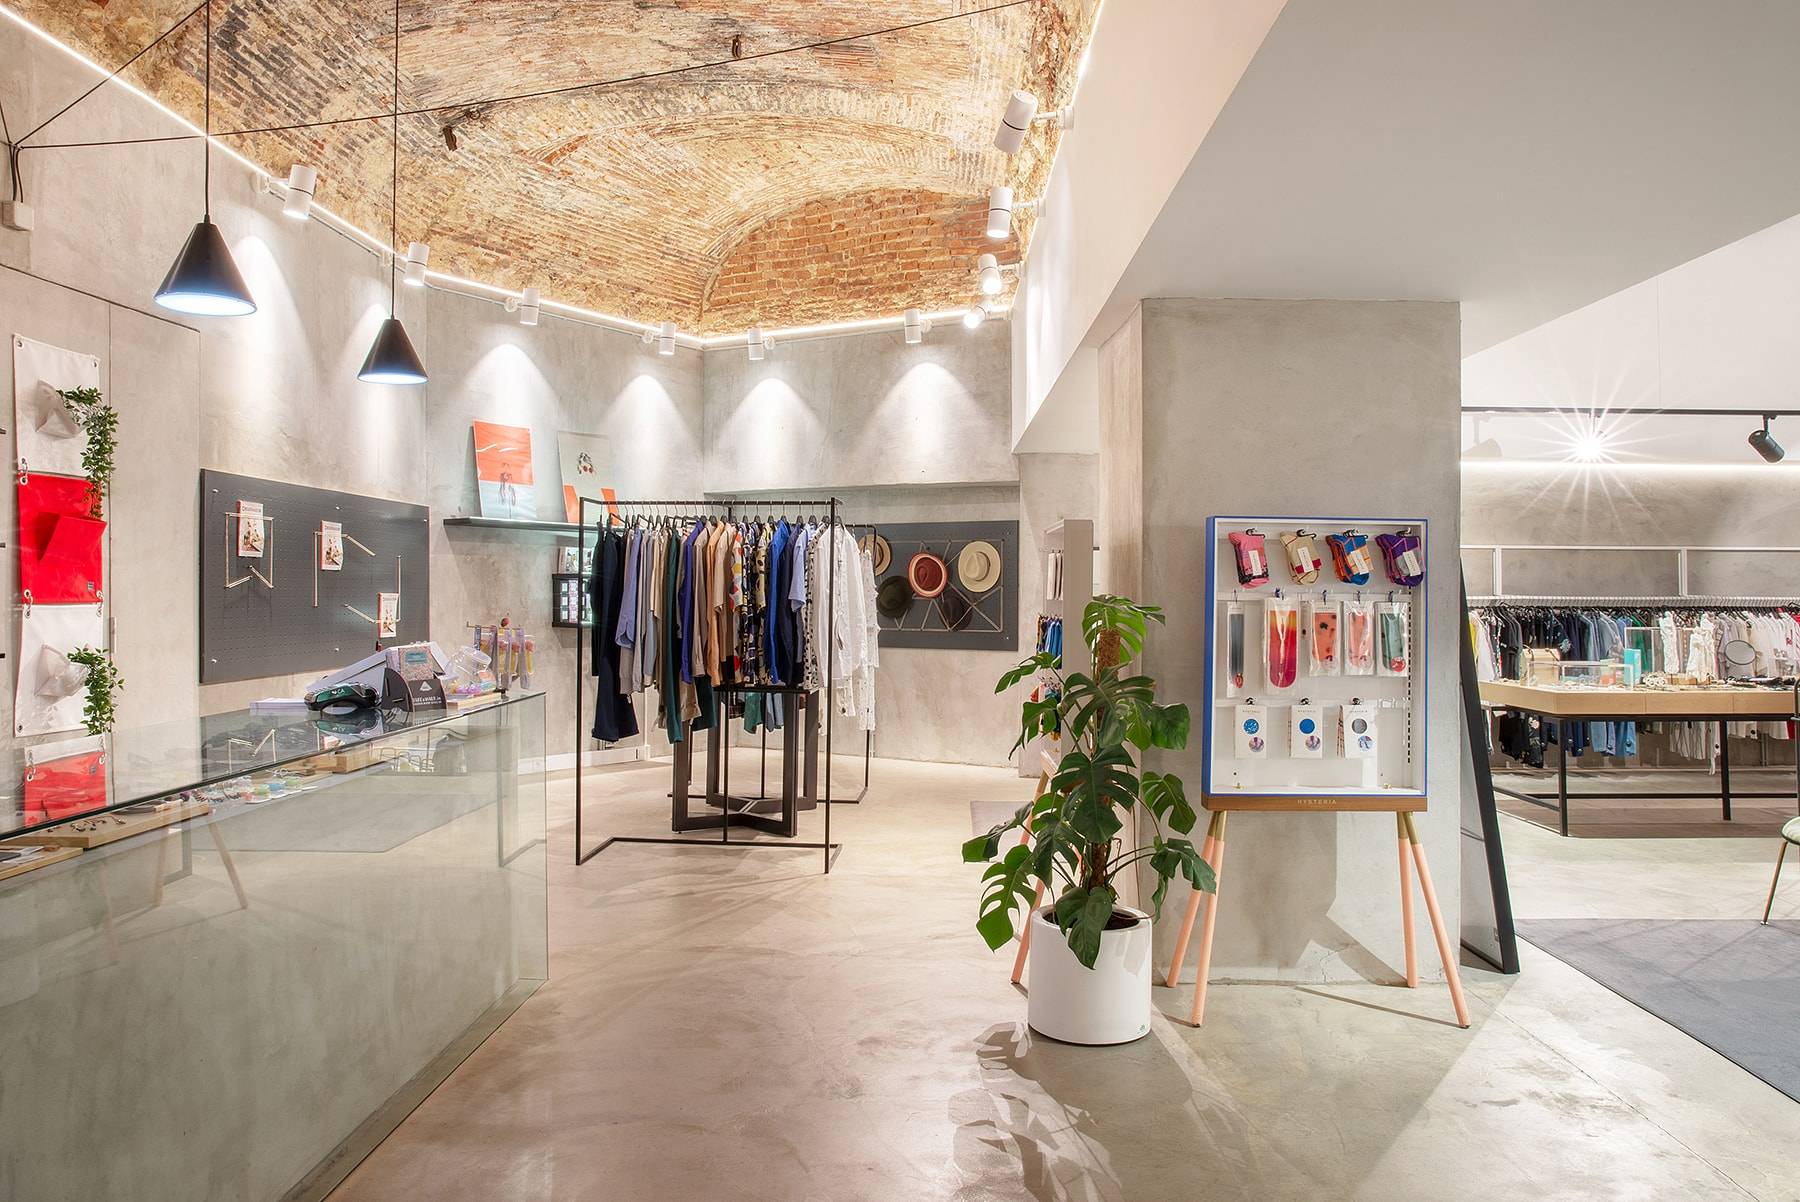 Inside view at maranathahouston curated concept shop in downtown Lisboa